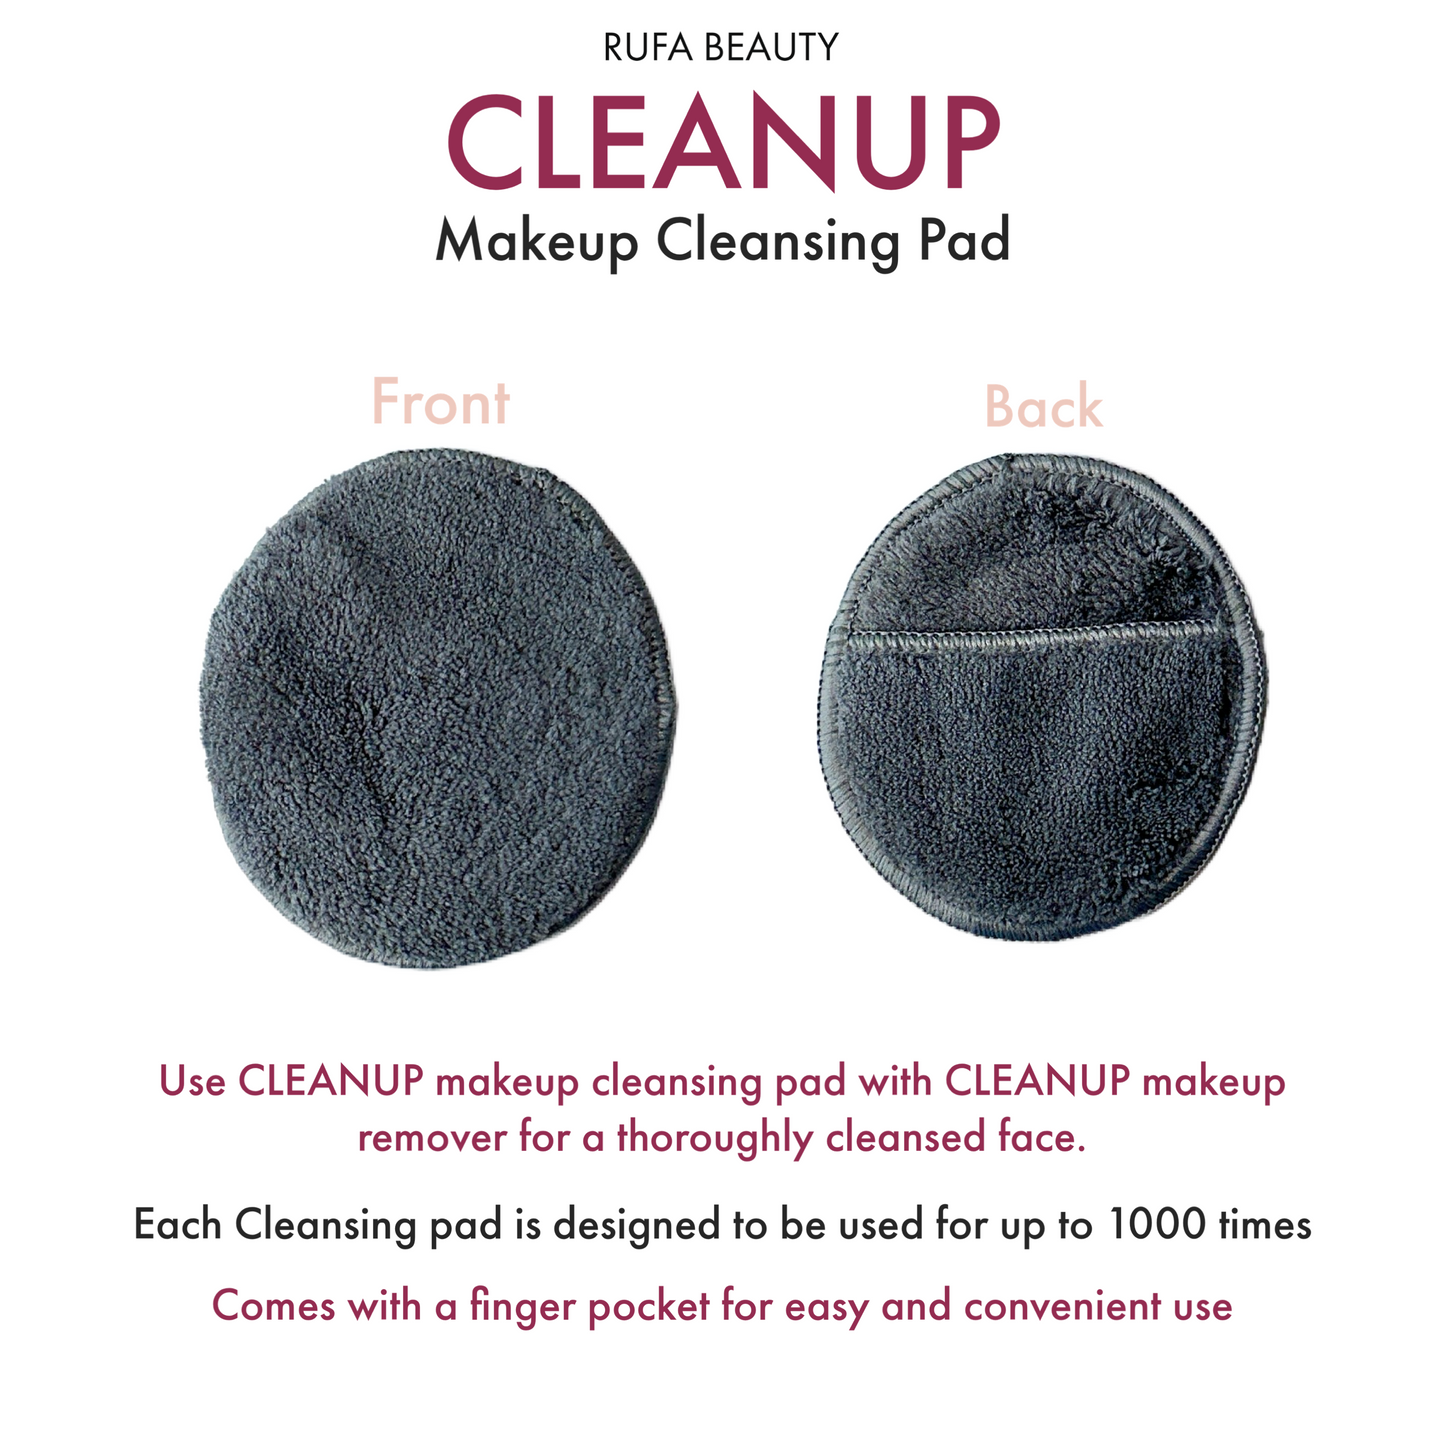 CLEANUP Makeup Remover + FREE Cleansing pad